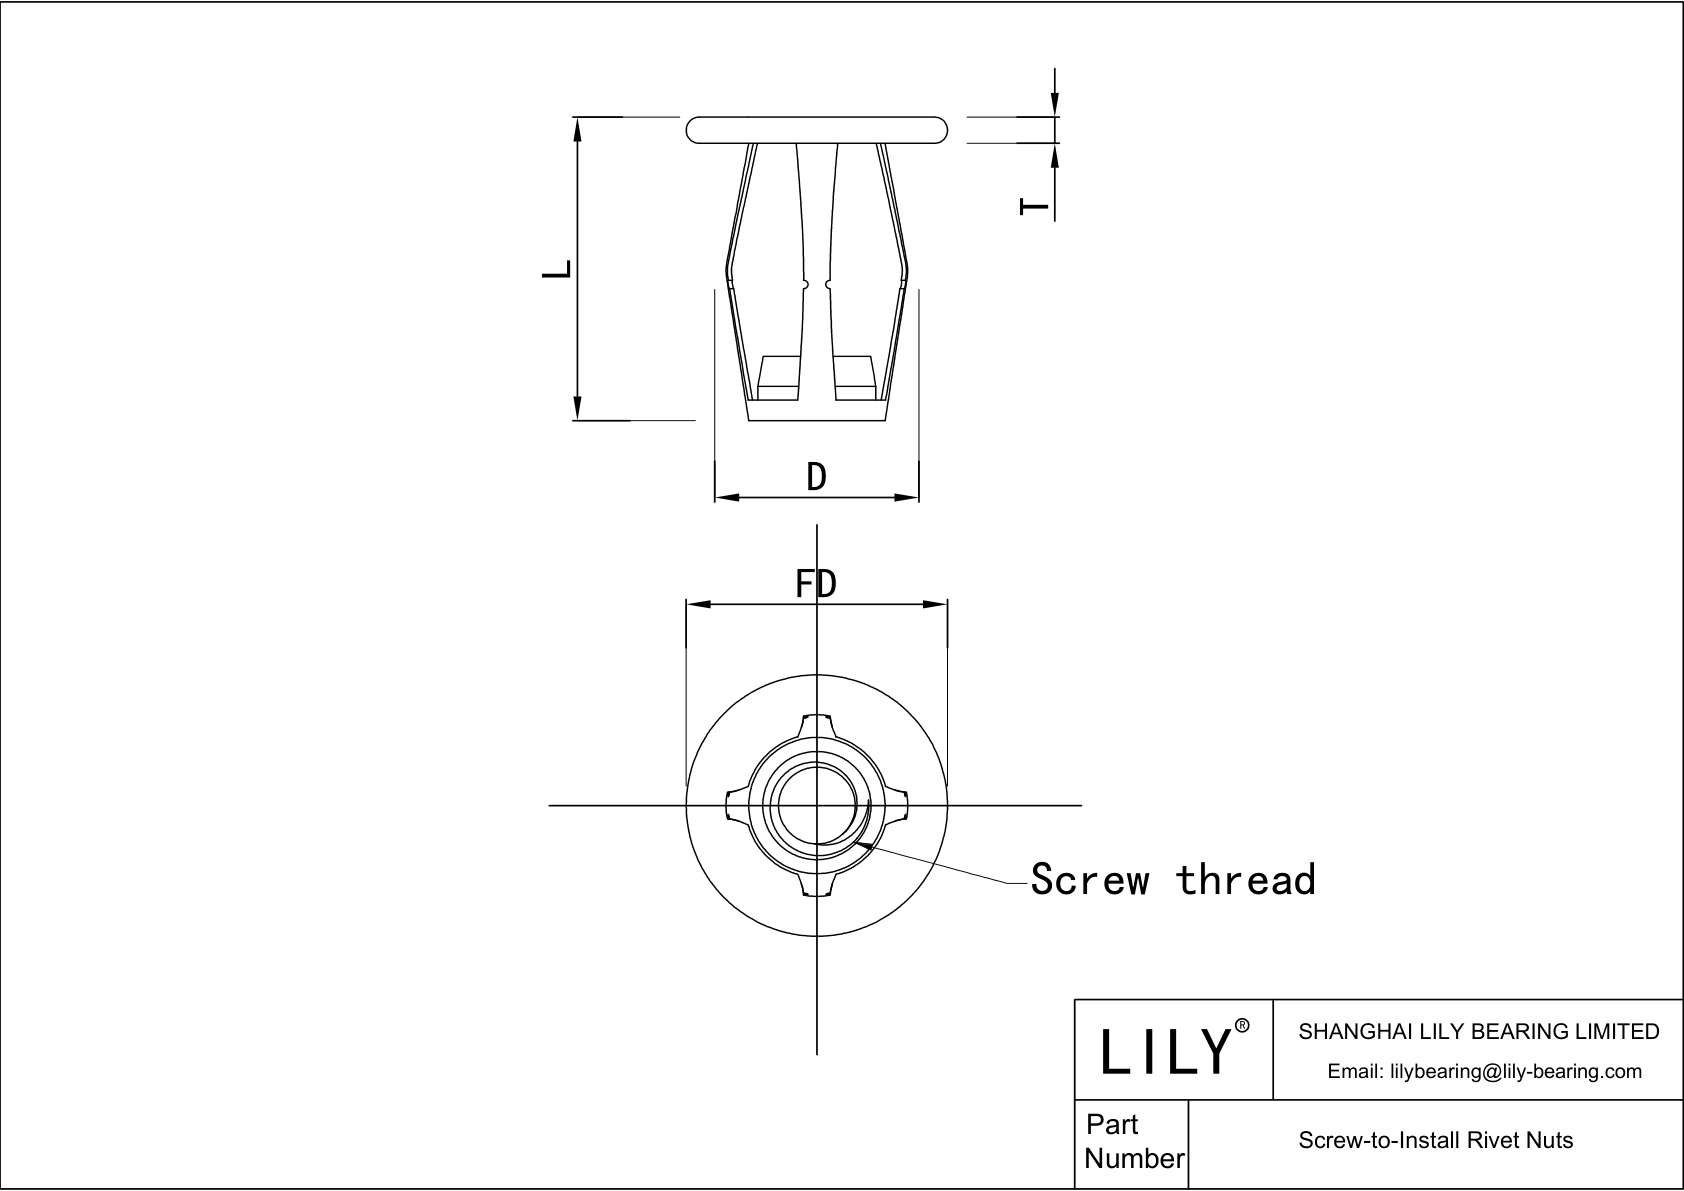 90186A211 | Screw-to-Install Rivet Nuts | Lily Bearing